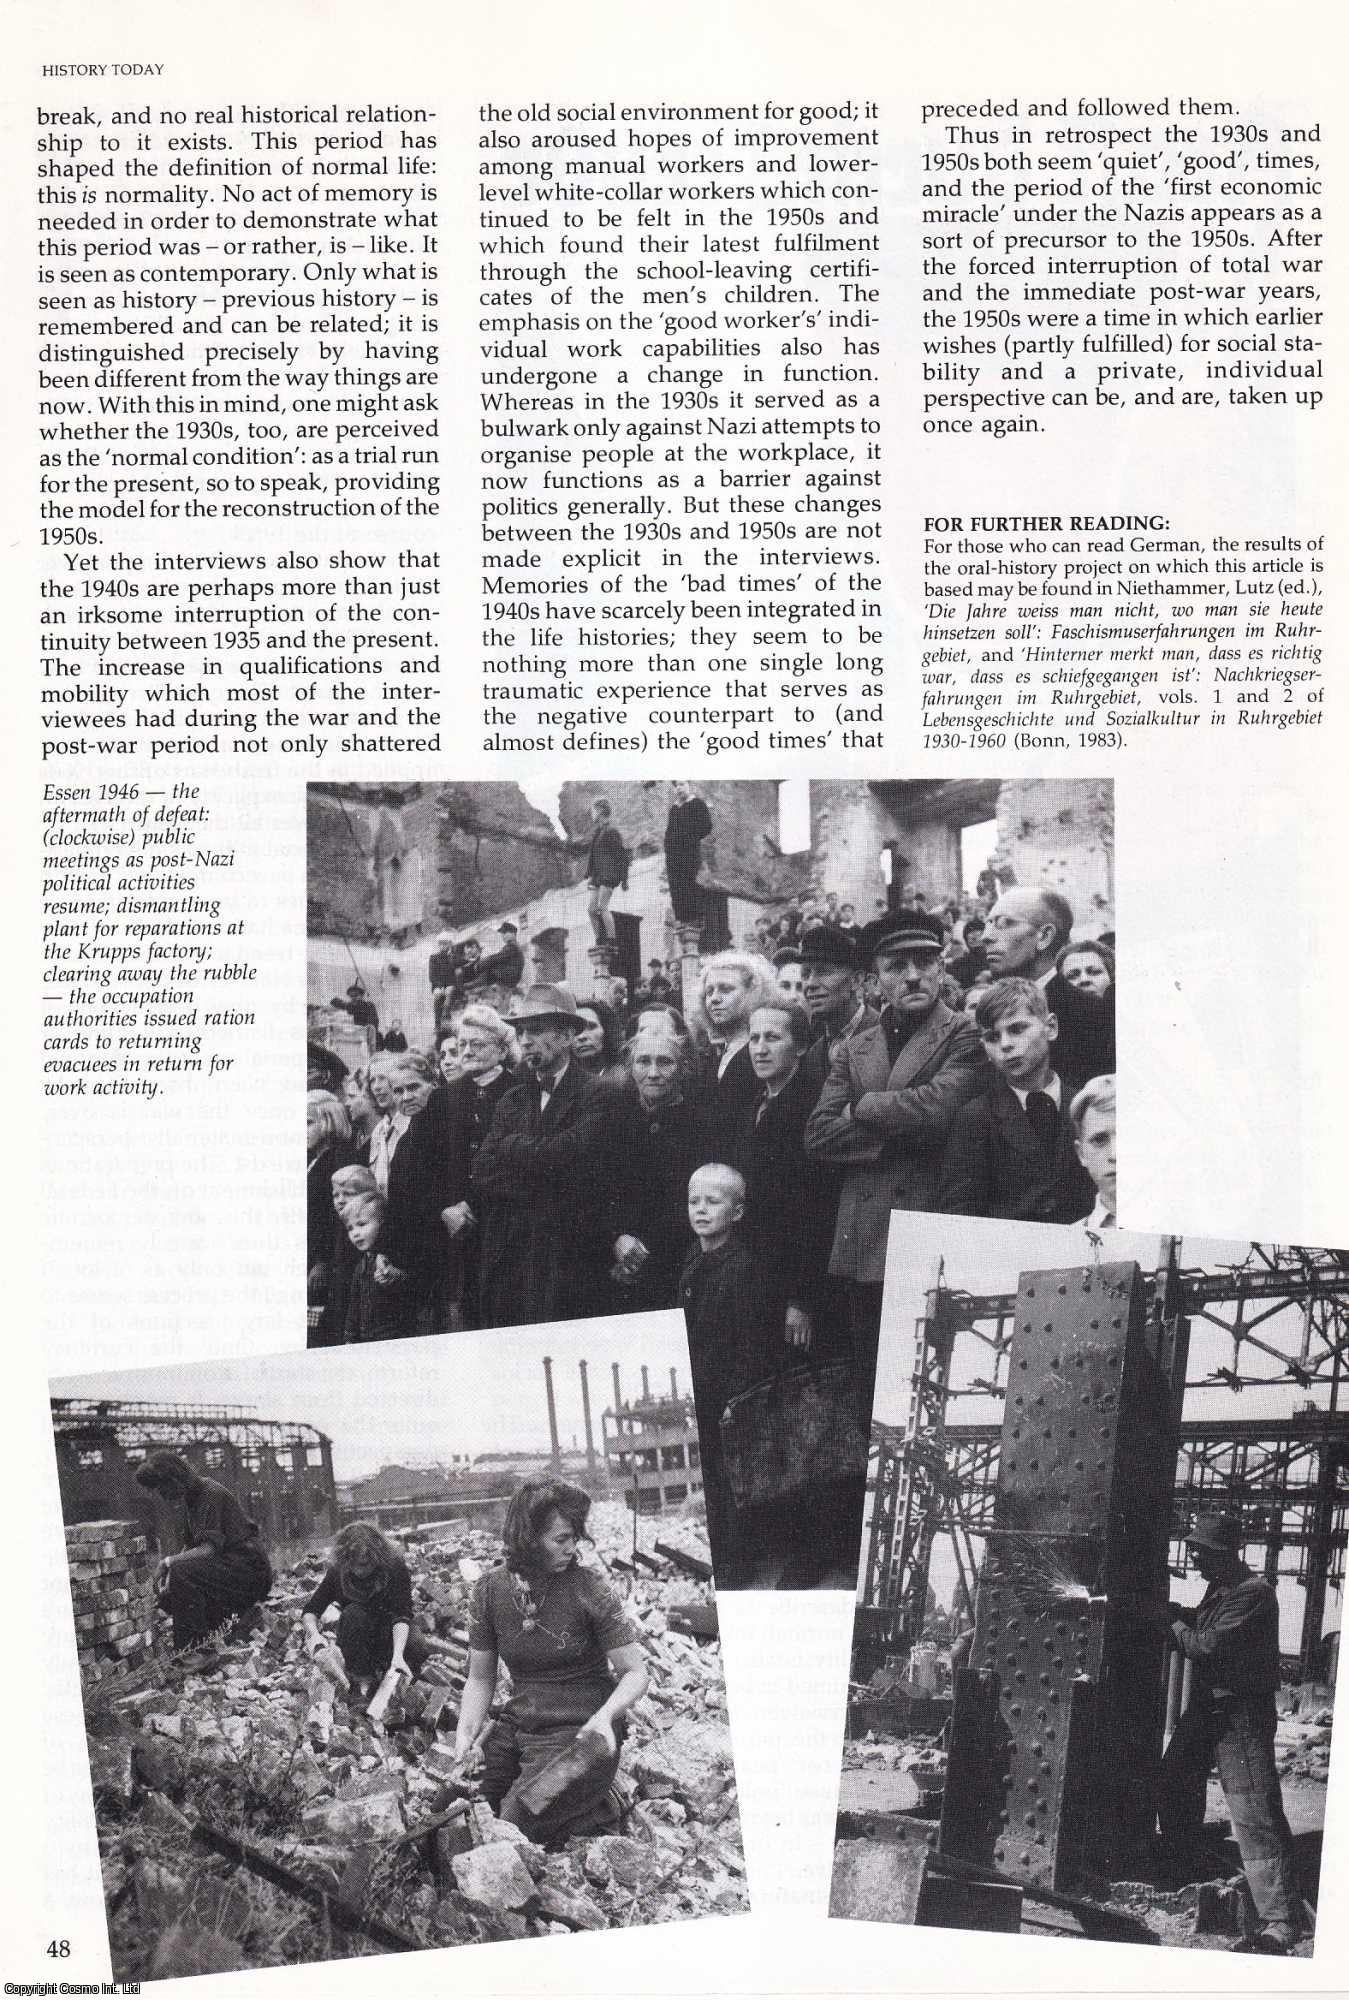 Ulrich Herbert 'Good Times, Bad Times' - Good Times, Bad Times': Life in the Third Reich. An original article from History Today, 1986.